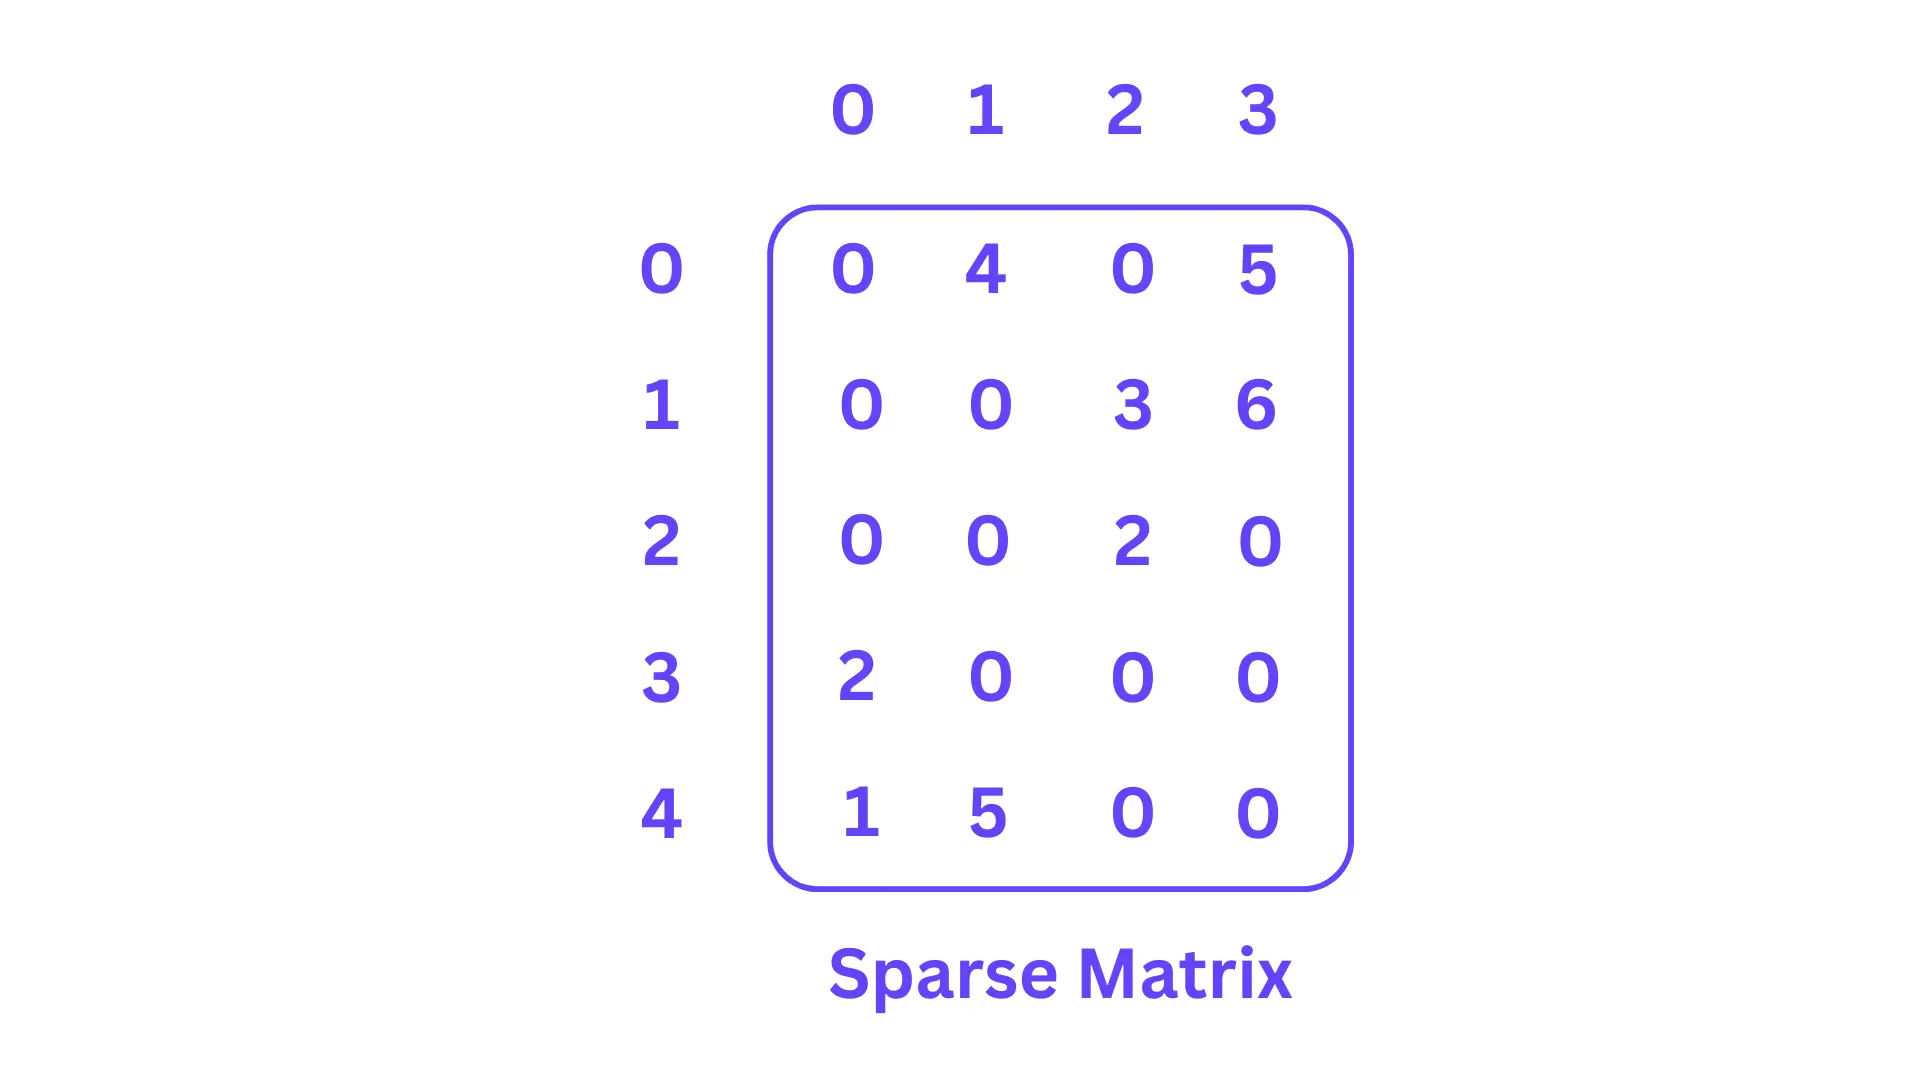 What is Sparse Matrix in Data Structures?